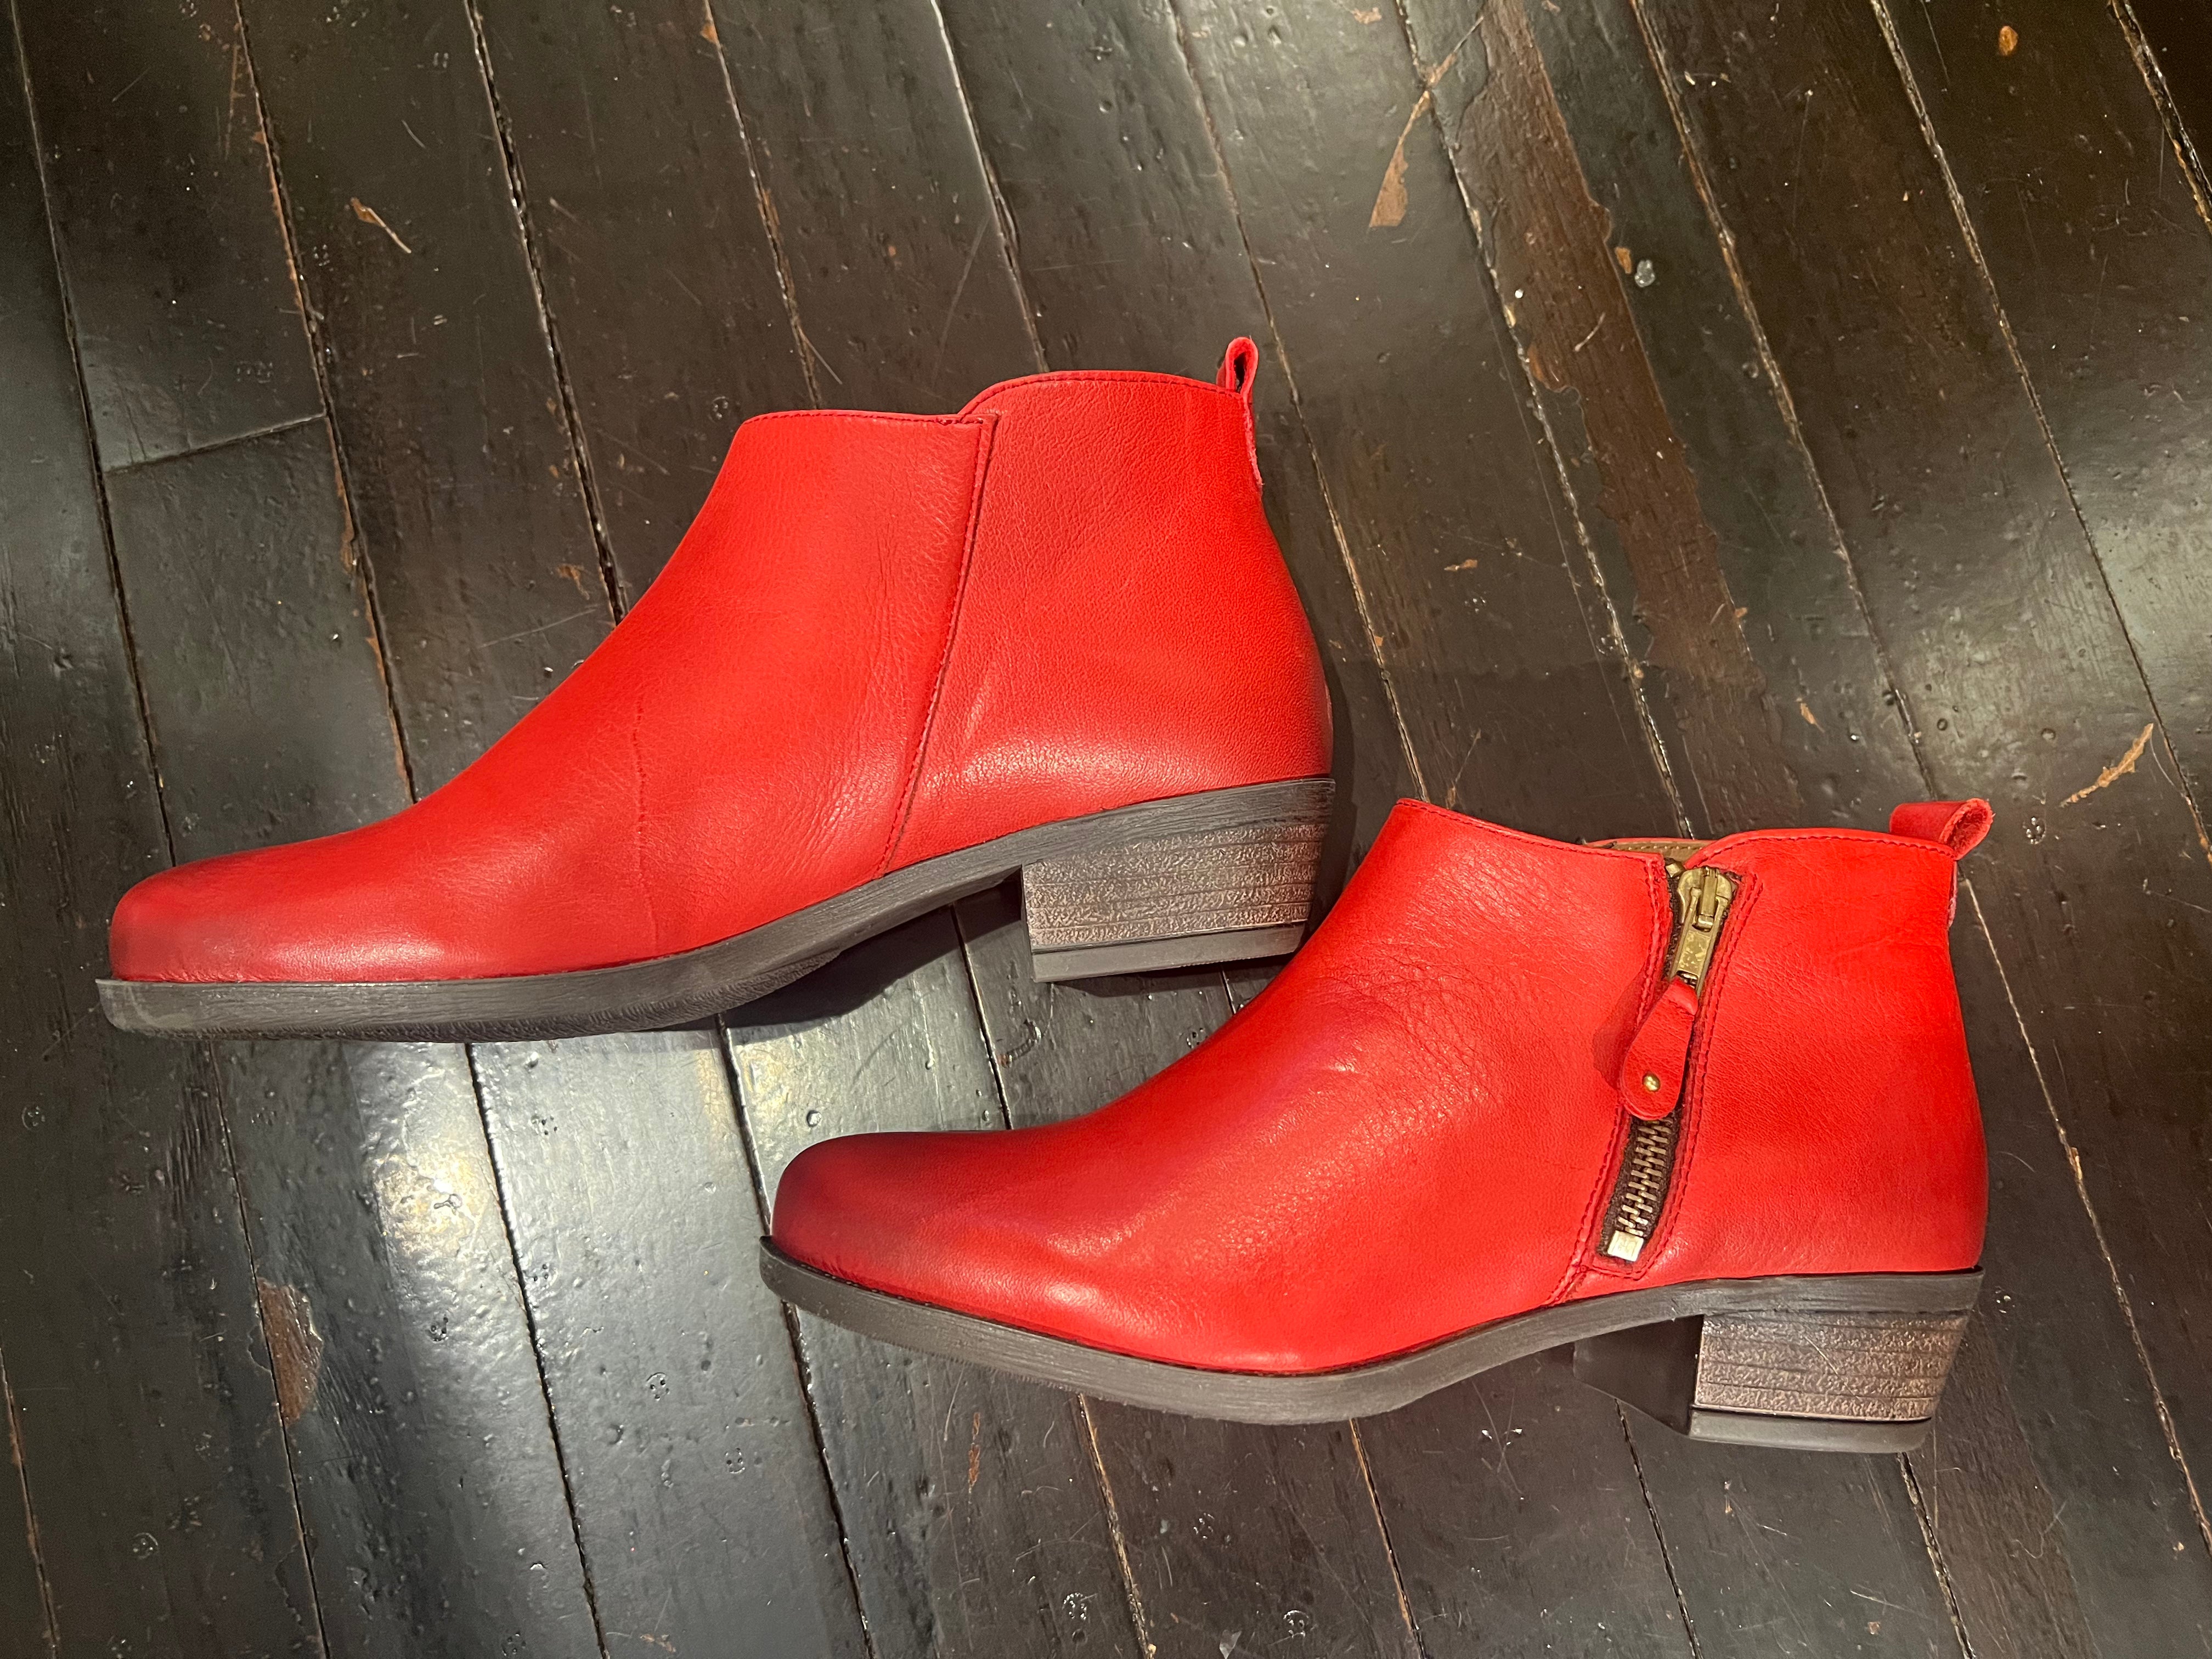 Eric Michael RED London Women's Boots